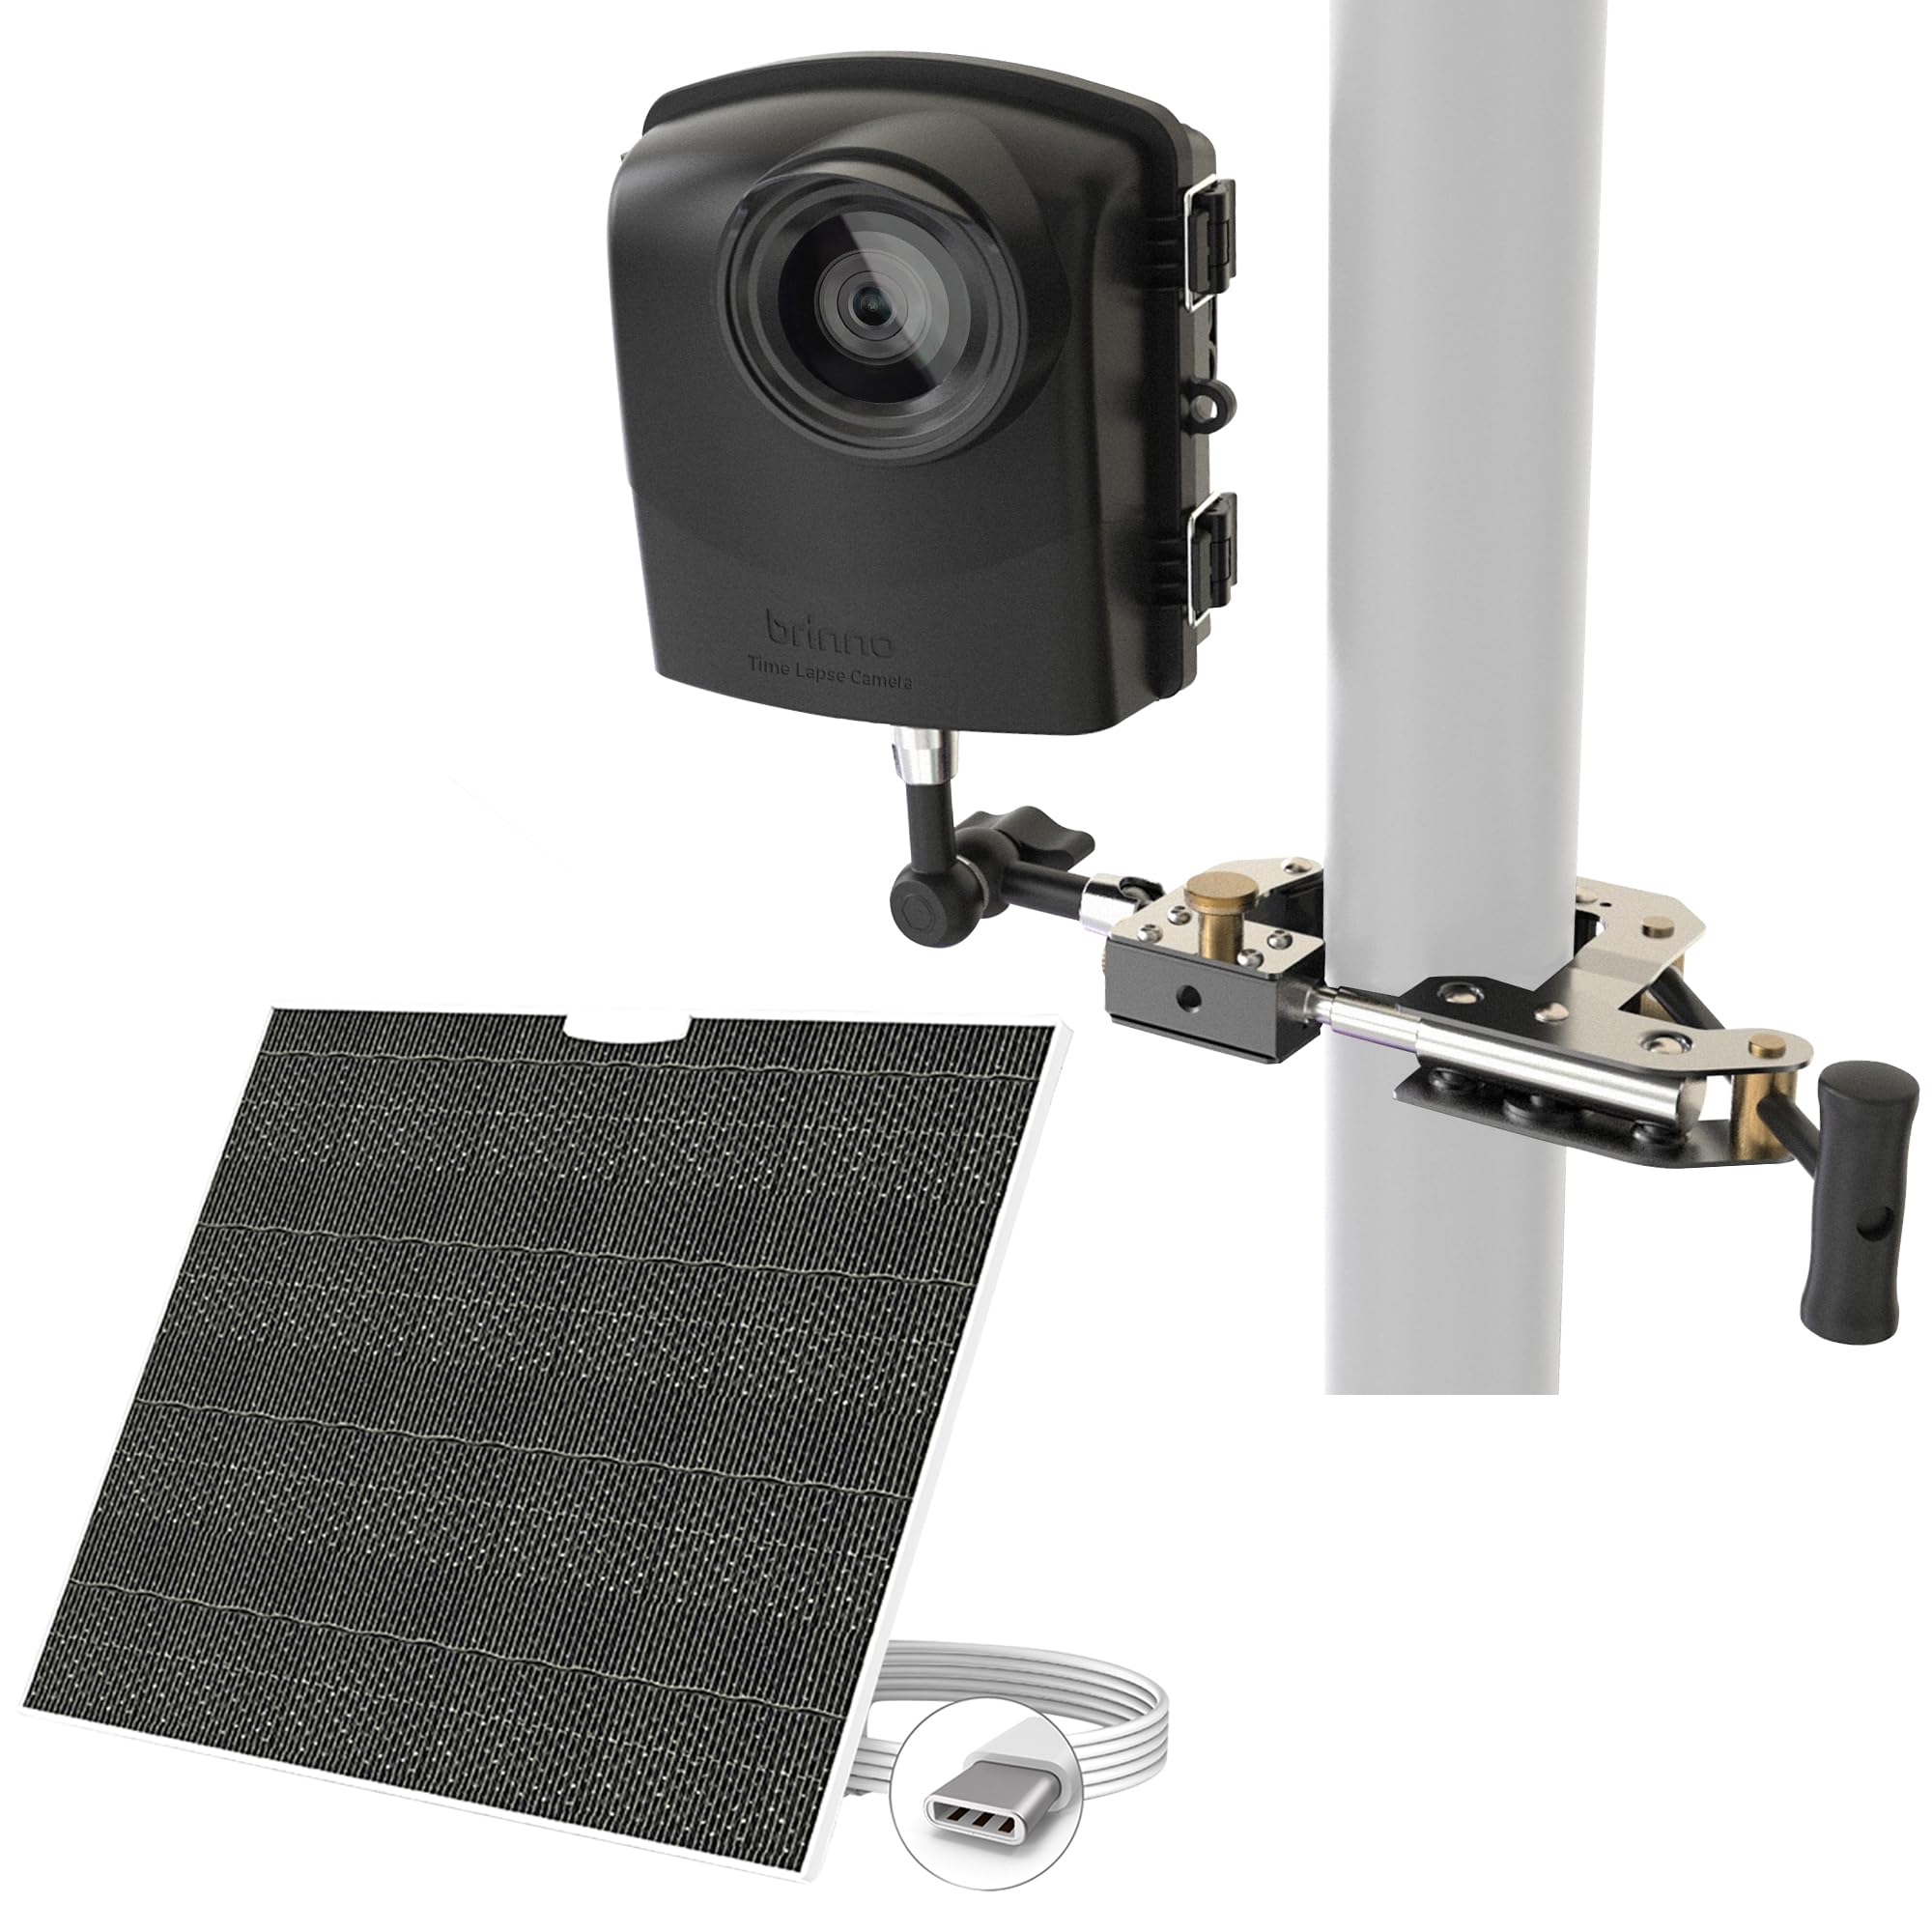 Brinno BCC2000 Plus + ASP1000-P Construction Camera and Solar Panel Kit Bundle | Includes: Full HD TLC2000 Time Lapse Camera, 32-ft Extender for Laptop/Tablet